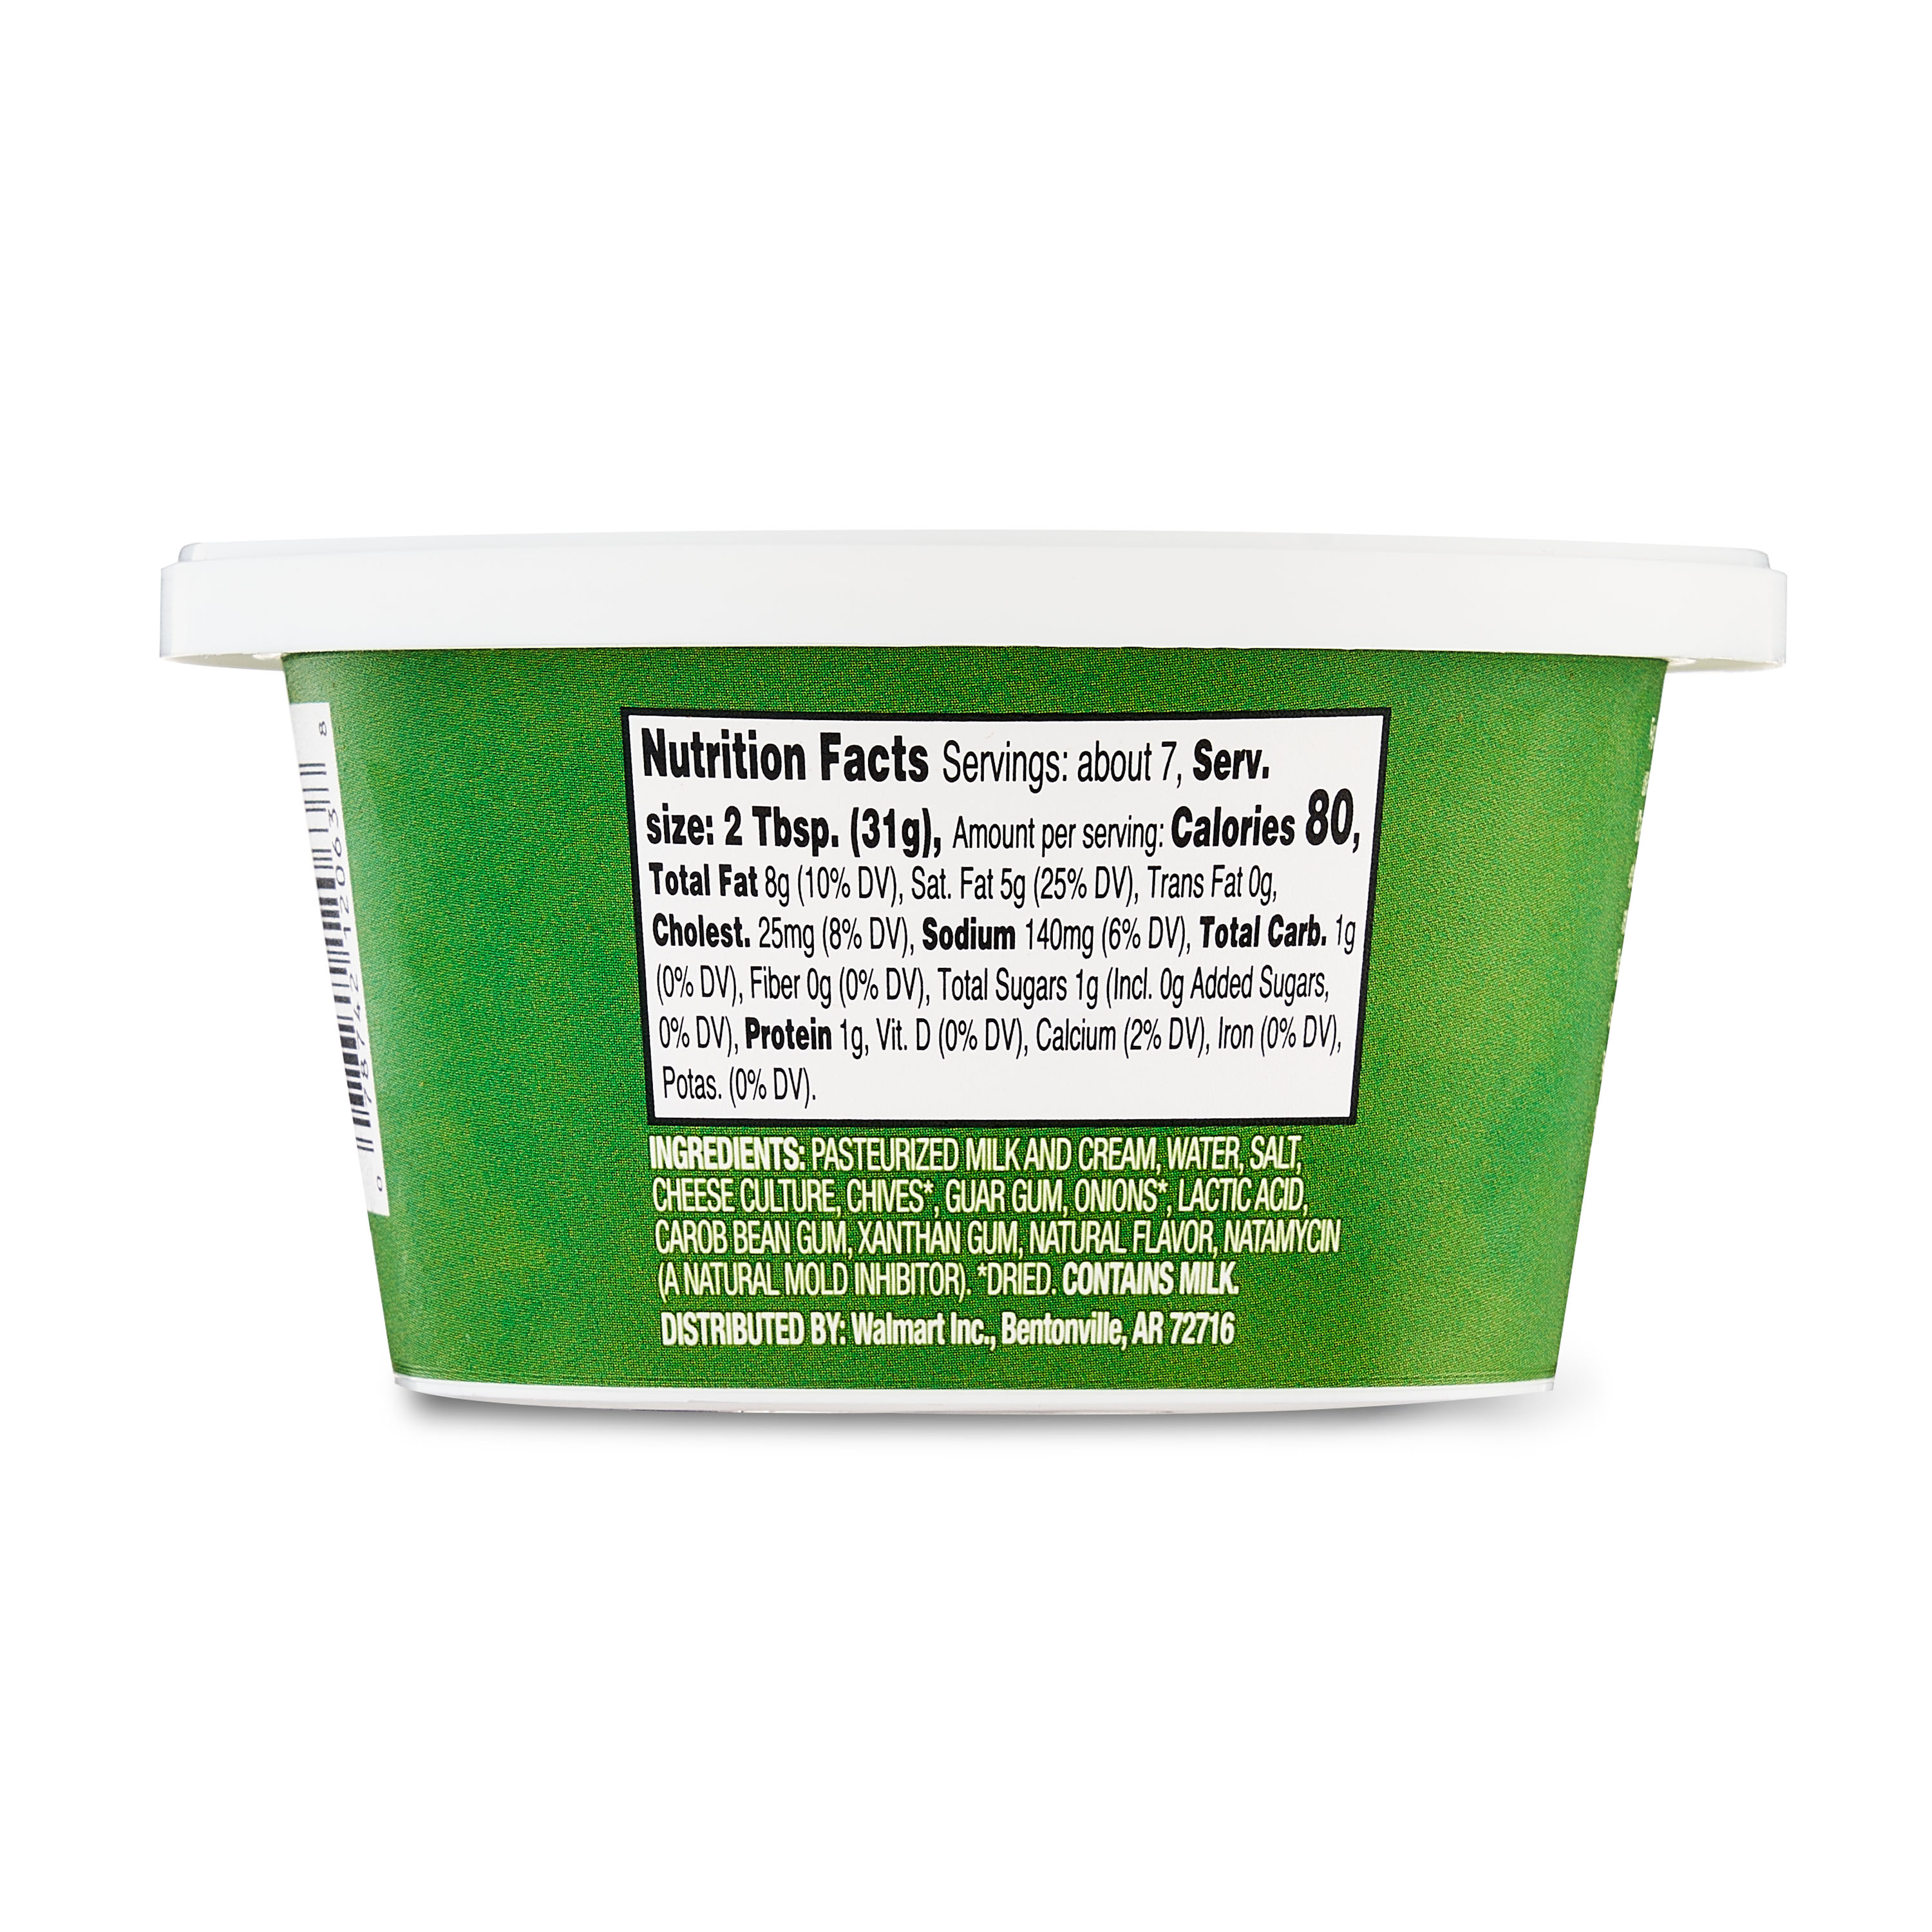 Great Value Chive & Onion Cream Cheese Spread, 8 oz Tub - image 5 of 7